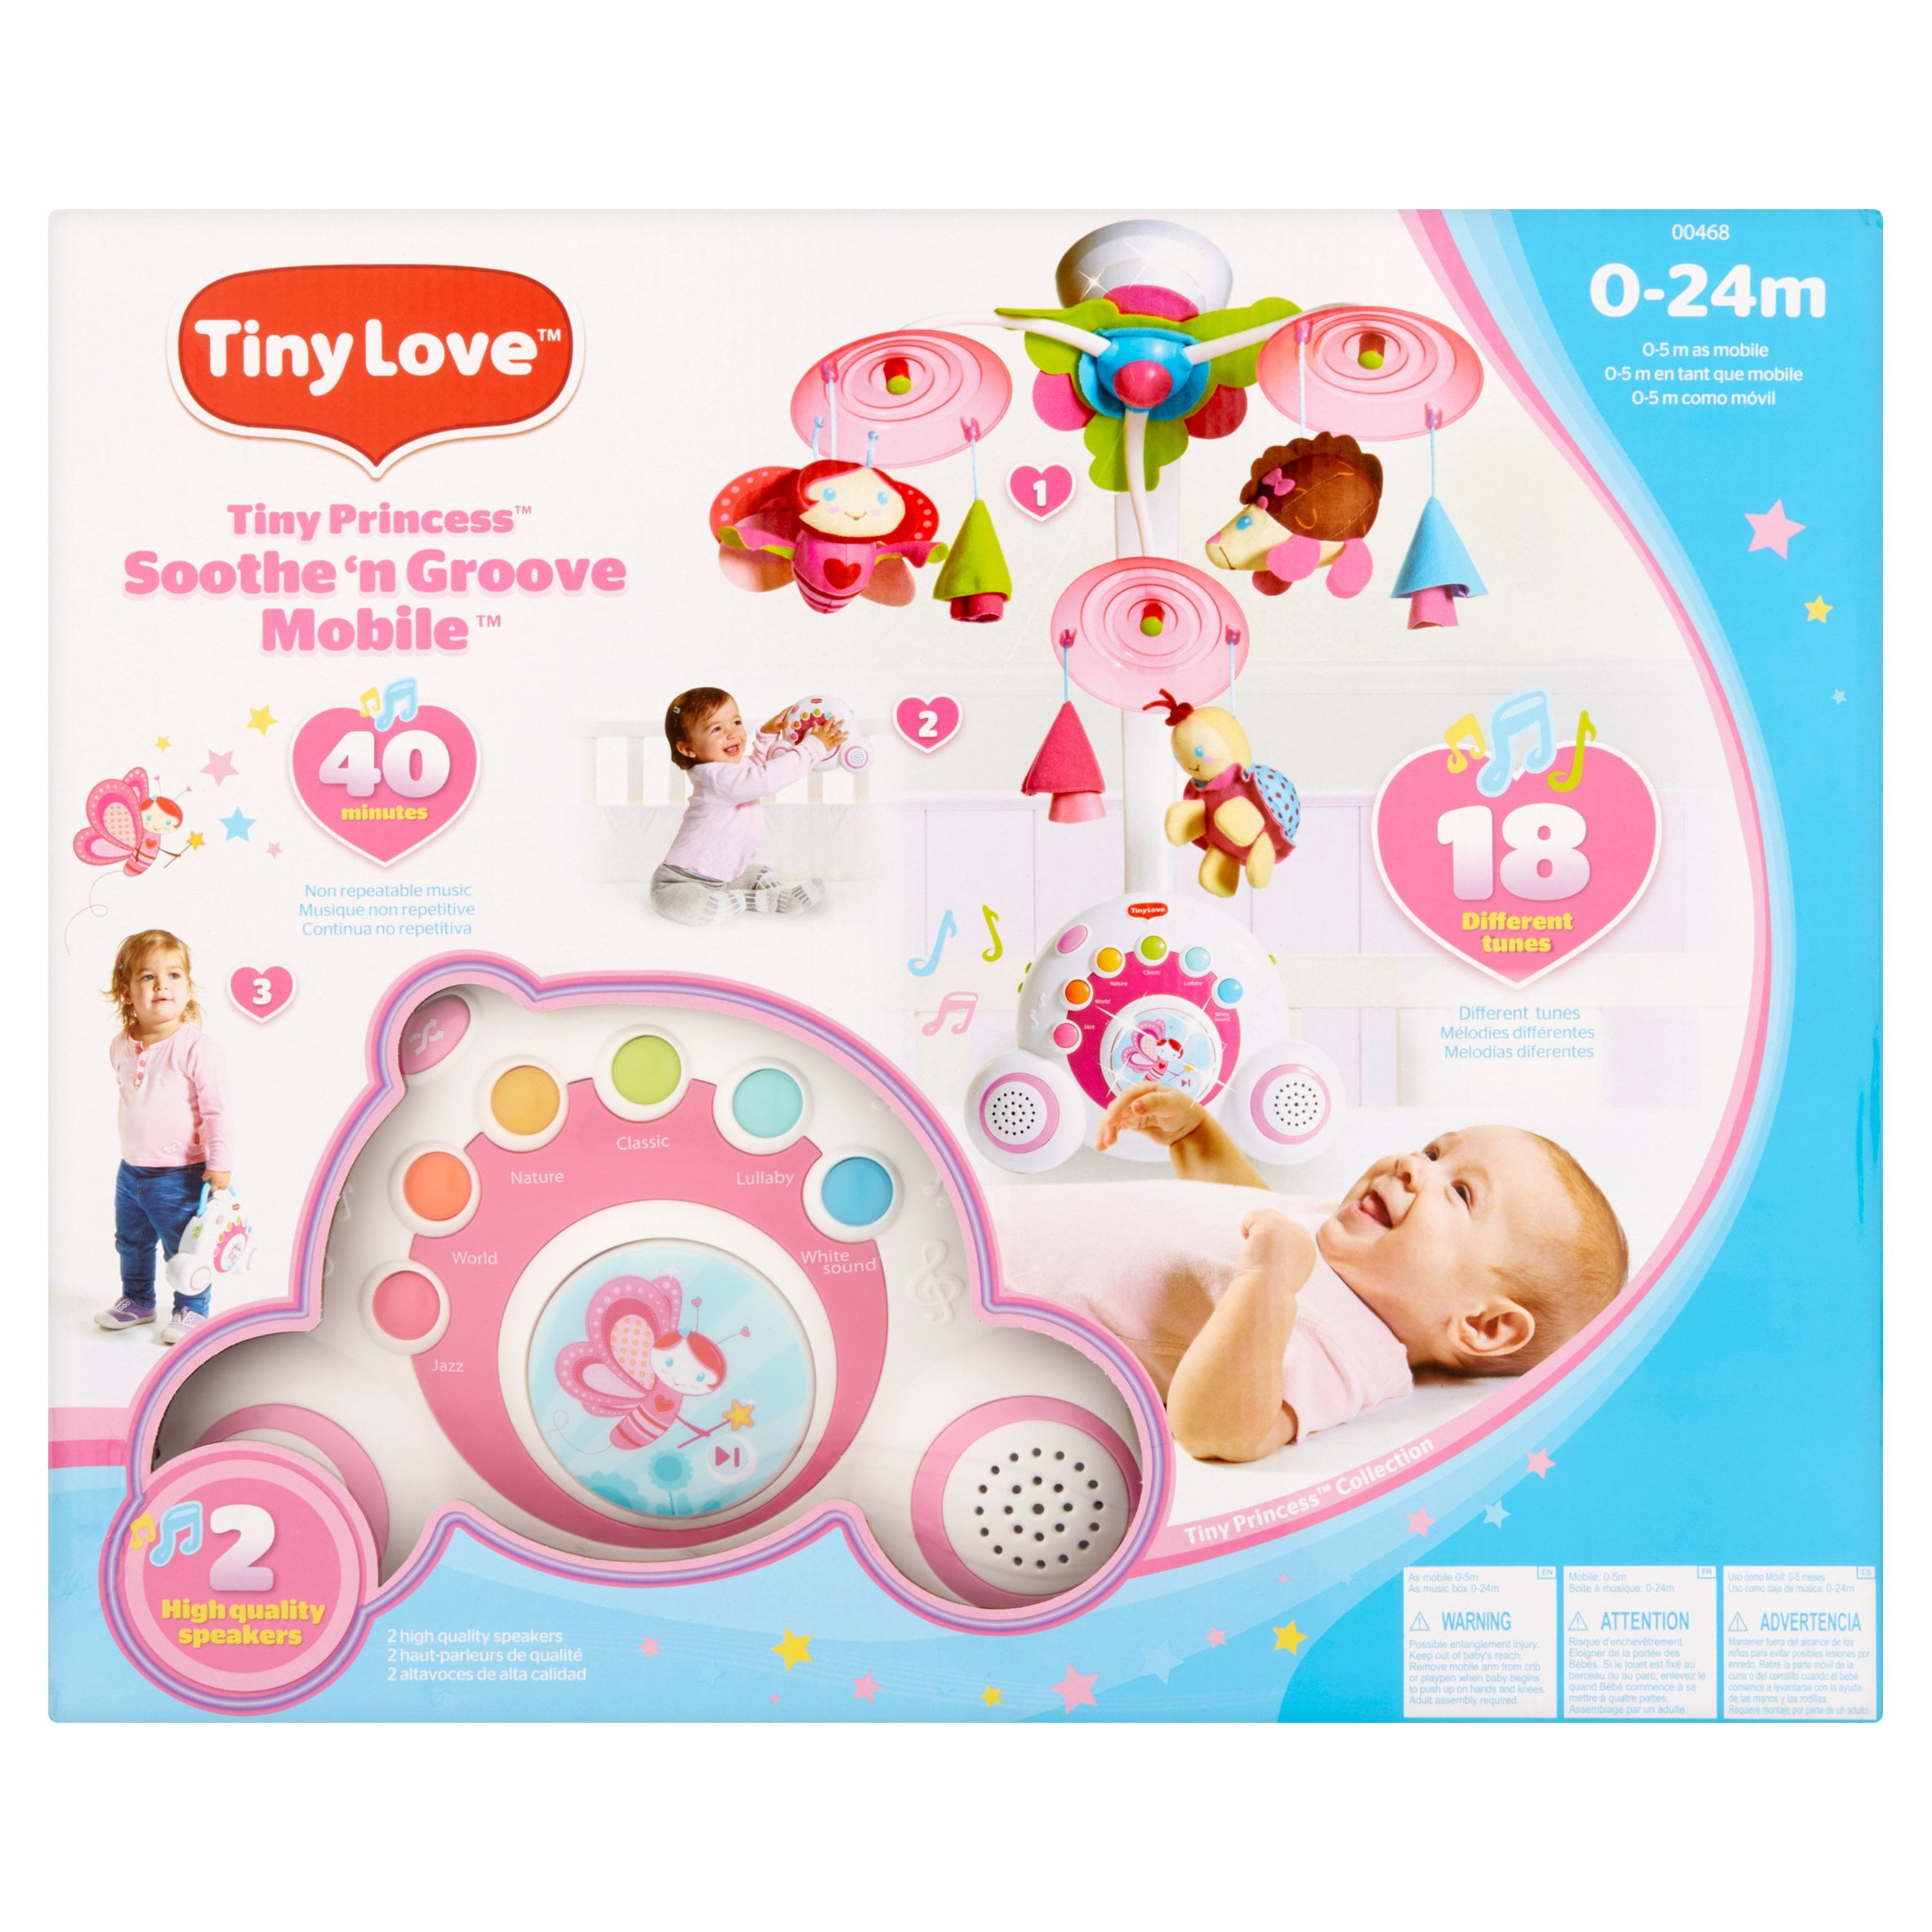 Tiny Love Mobile Princess Soothe 'n Groove